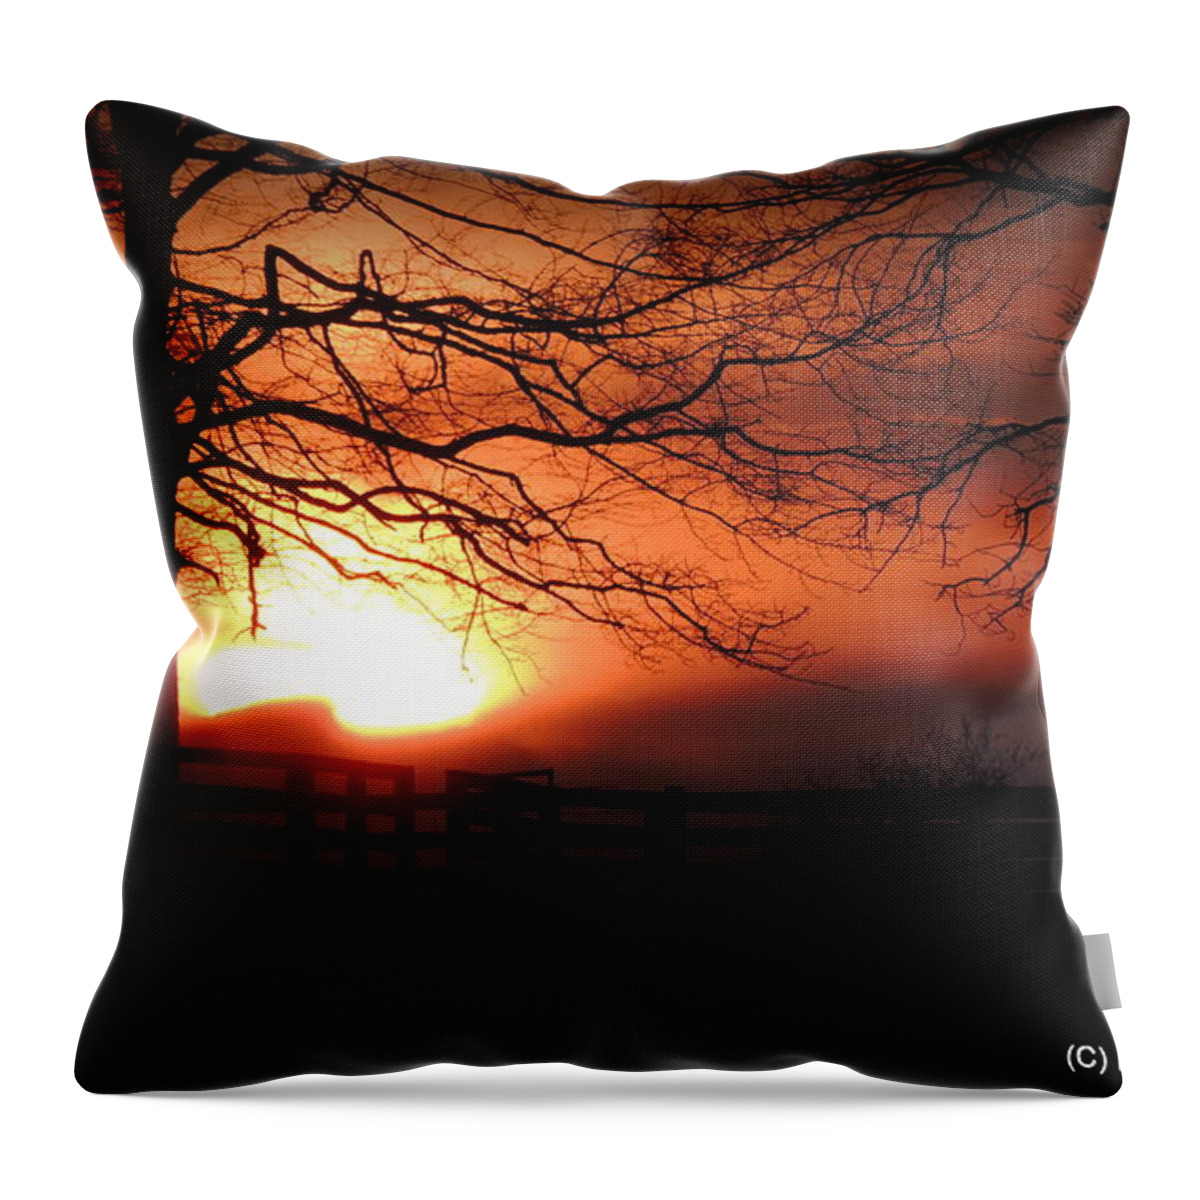 Sunrise Throw Pillow featuring the photograph Morning Sunrise by Rabiah Seminole